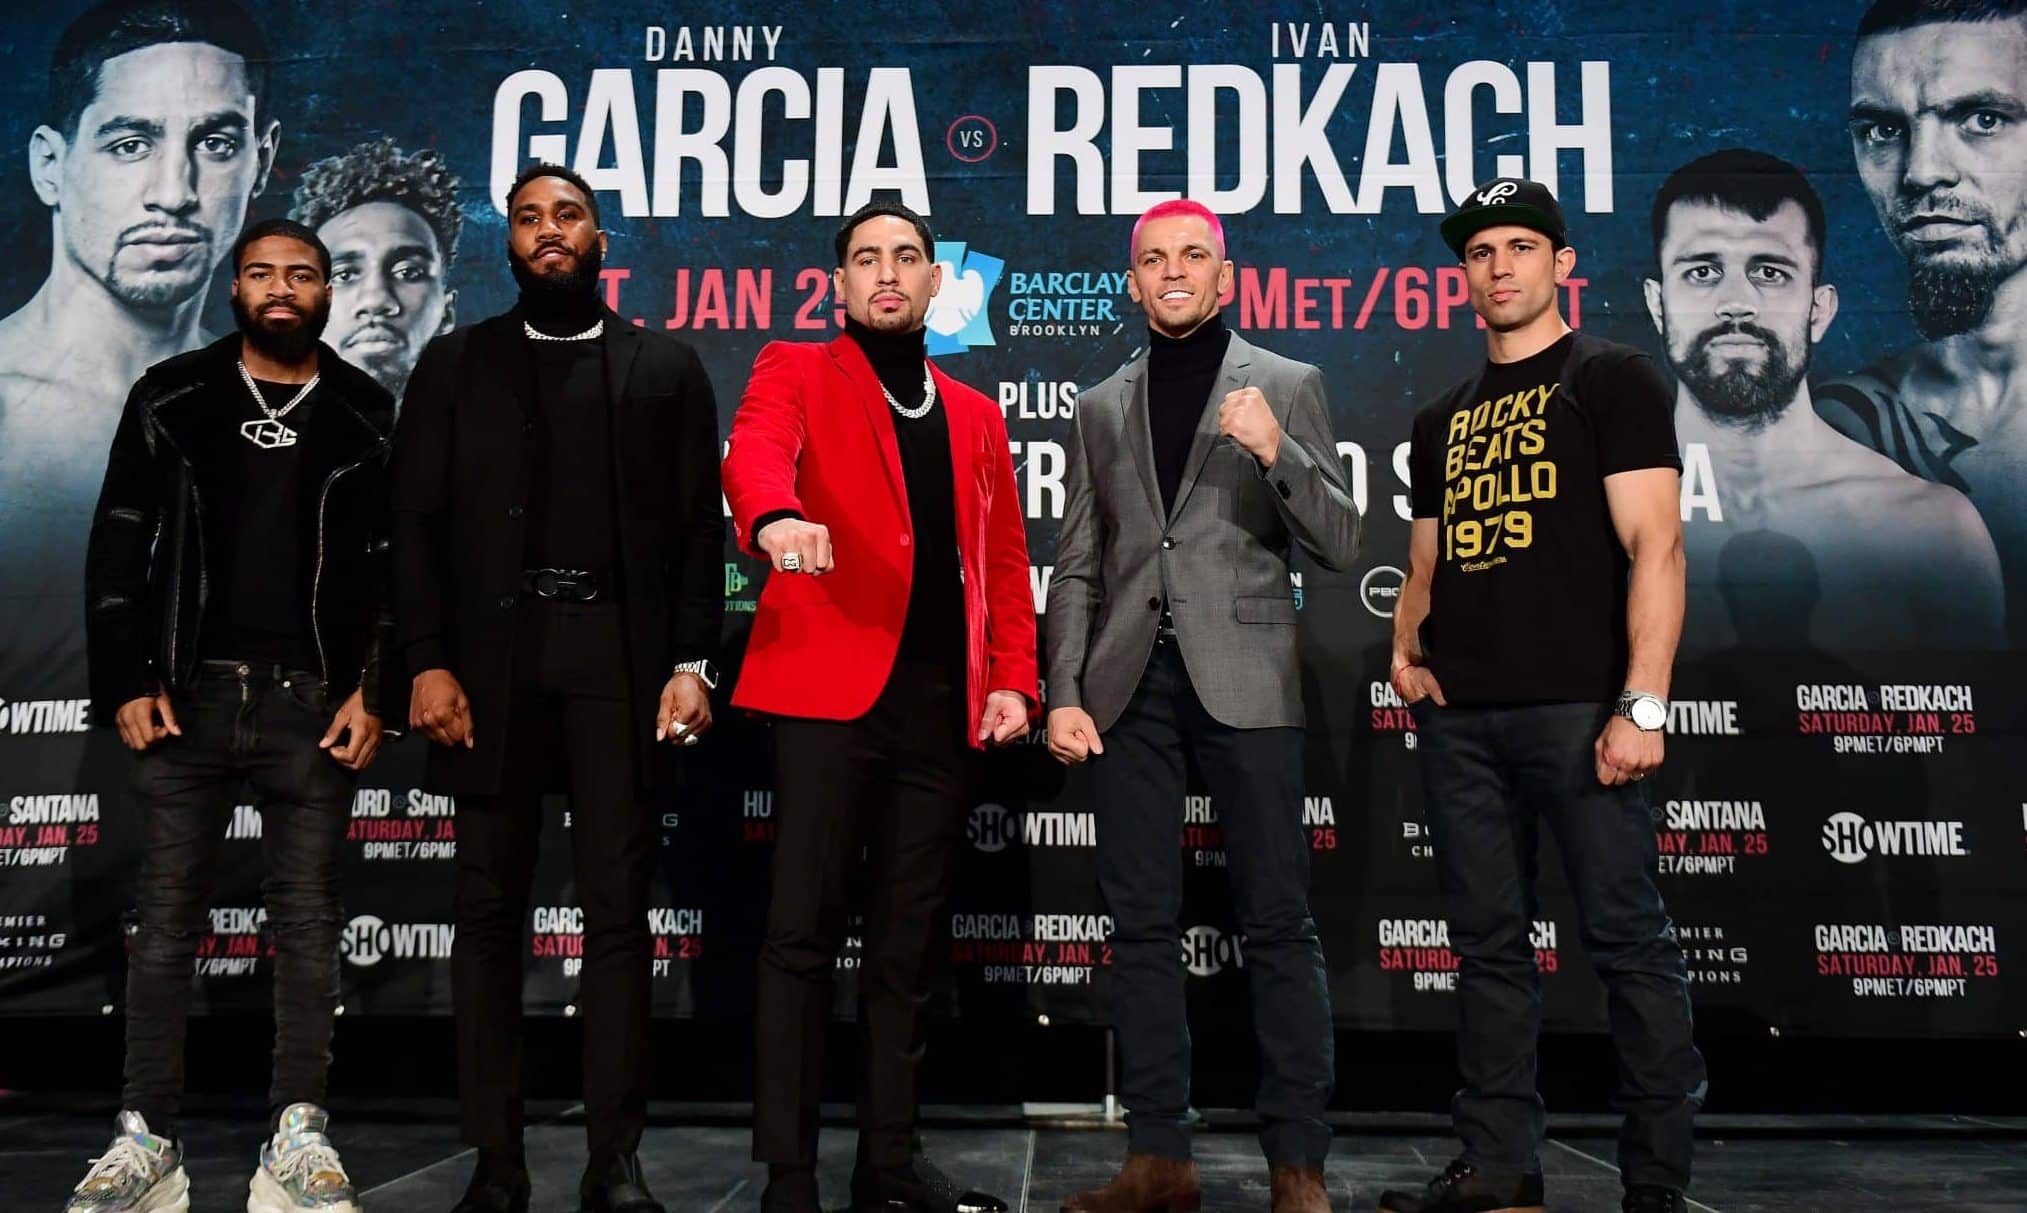 NEW YORK, NEW YORK - DECEMBER 18: Stephen Fulton, Jarrett Hurd, Danny Garcia, Ivan Redkach, and Francisco Santana pose for a photo during a press conference at Barclays Center on December 18, 2019 in New York City. Danny Garcia of the United States and Ivan Redkach of Ukraine will headline this event on January 25 at Barclays Center.